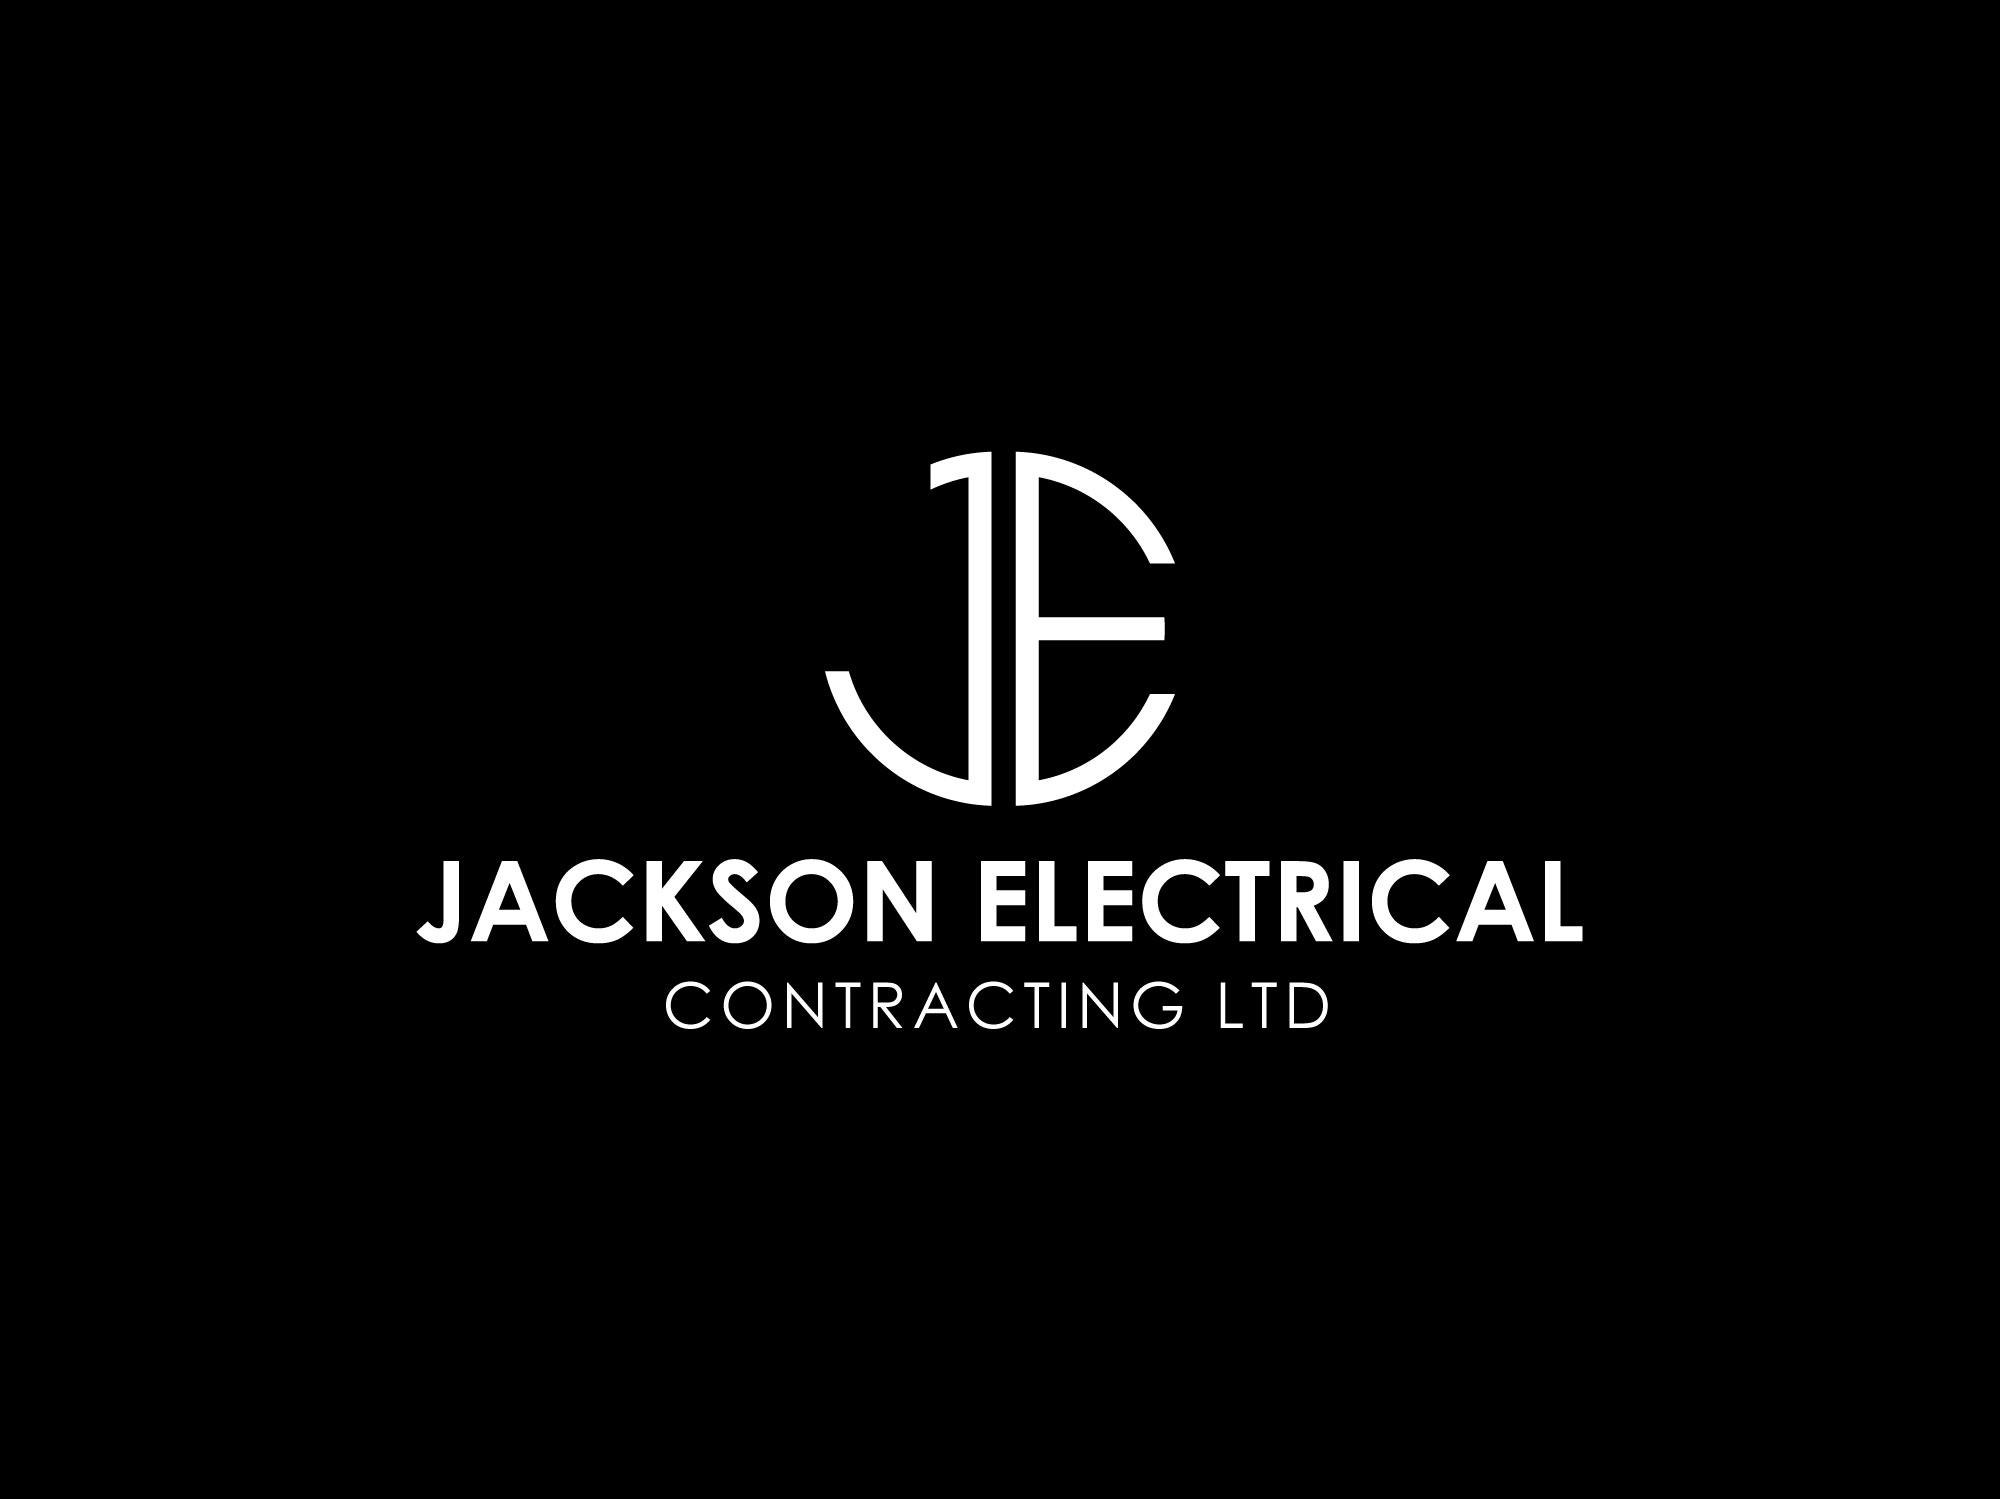 Jackson Electrical Contracting LTD.